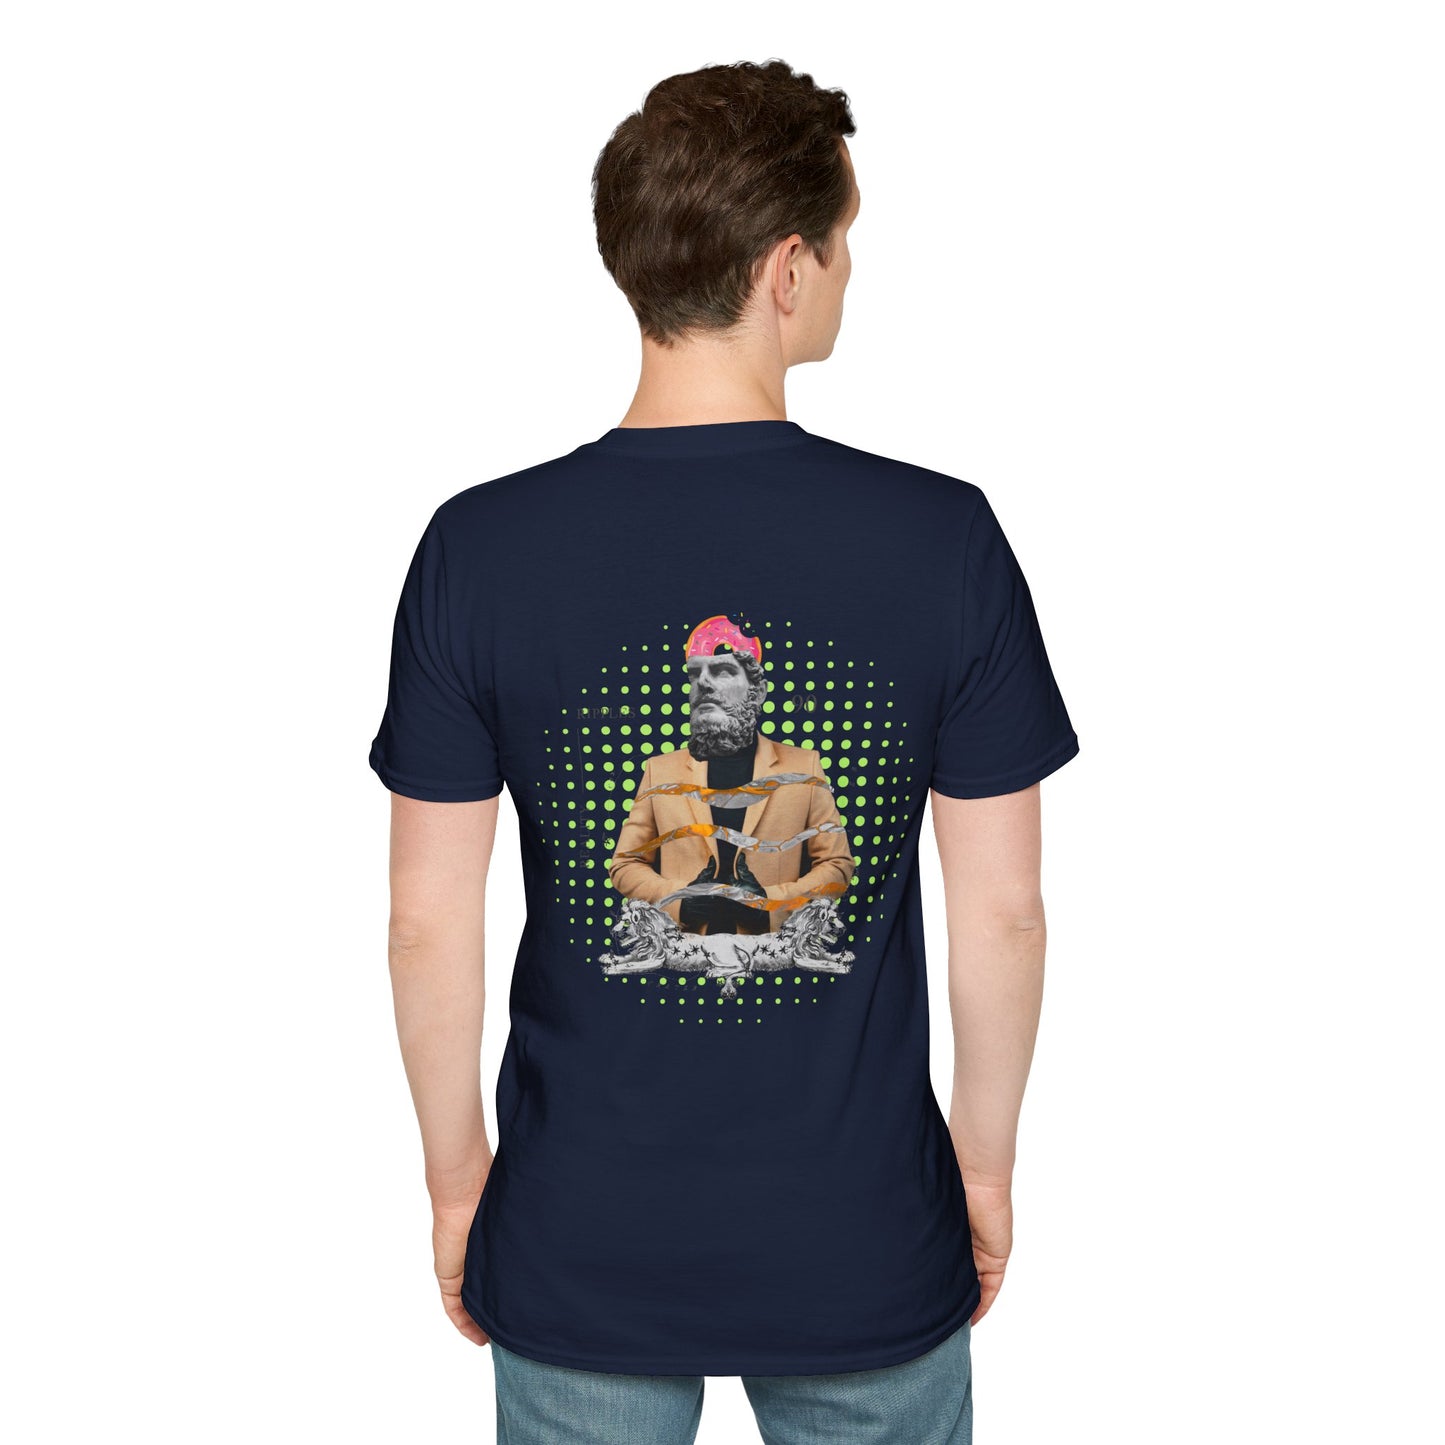 Navy T-shirt featuring a collage of a Greek statue head with a modern glitch art twist